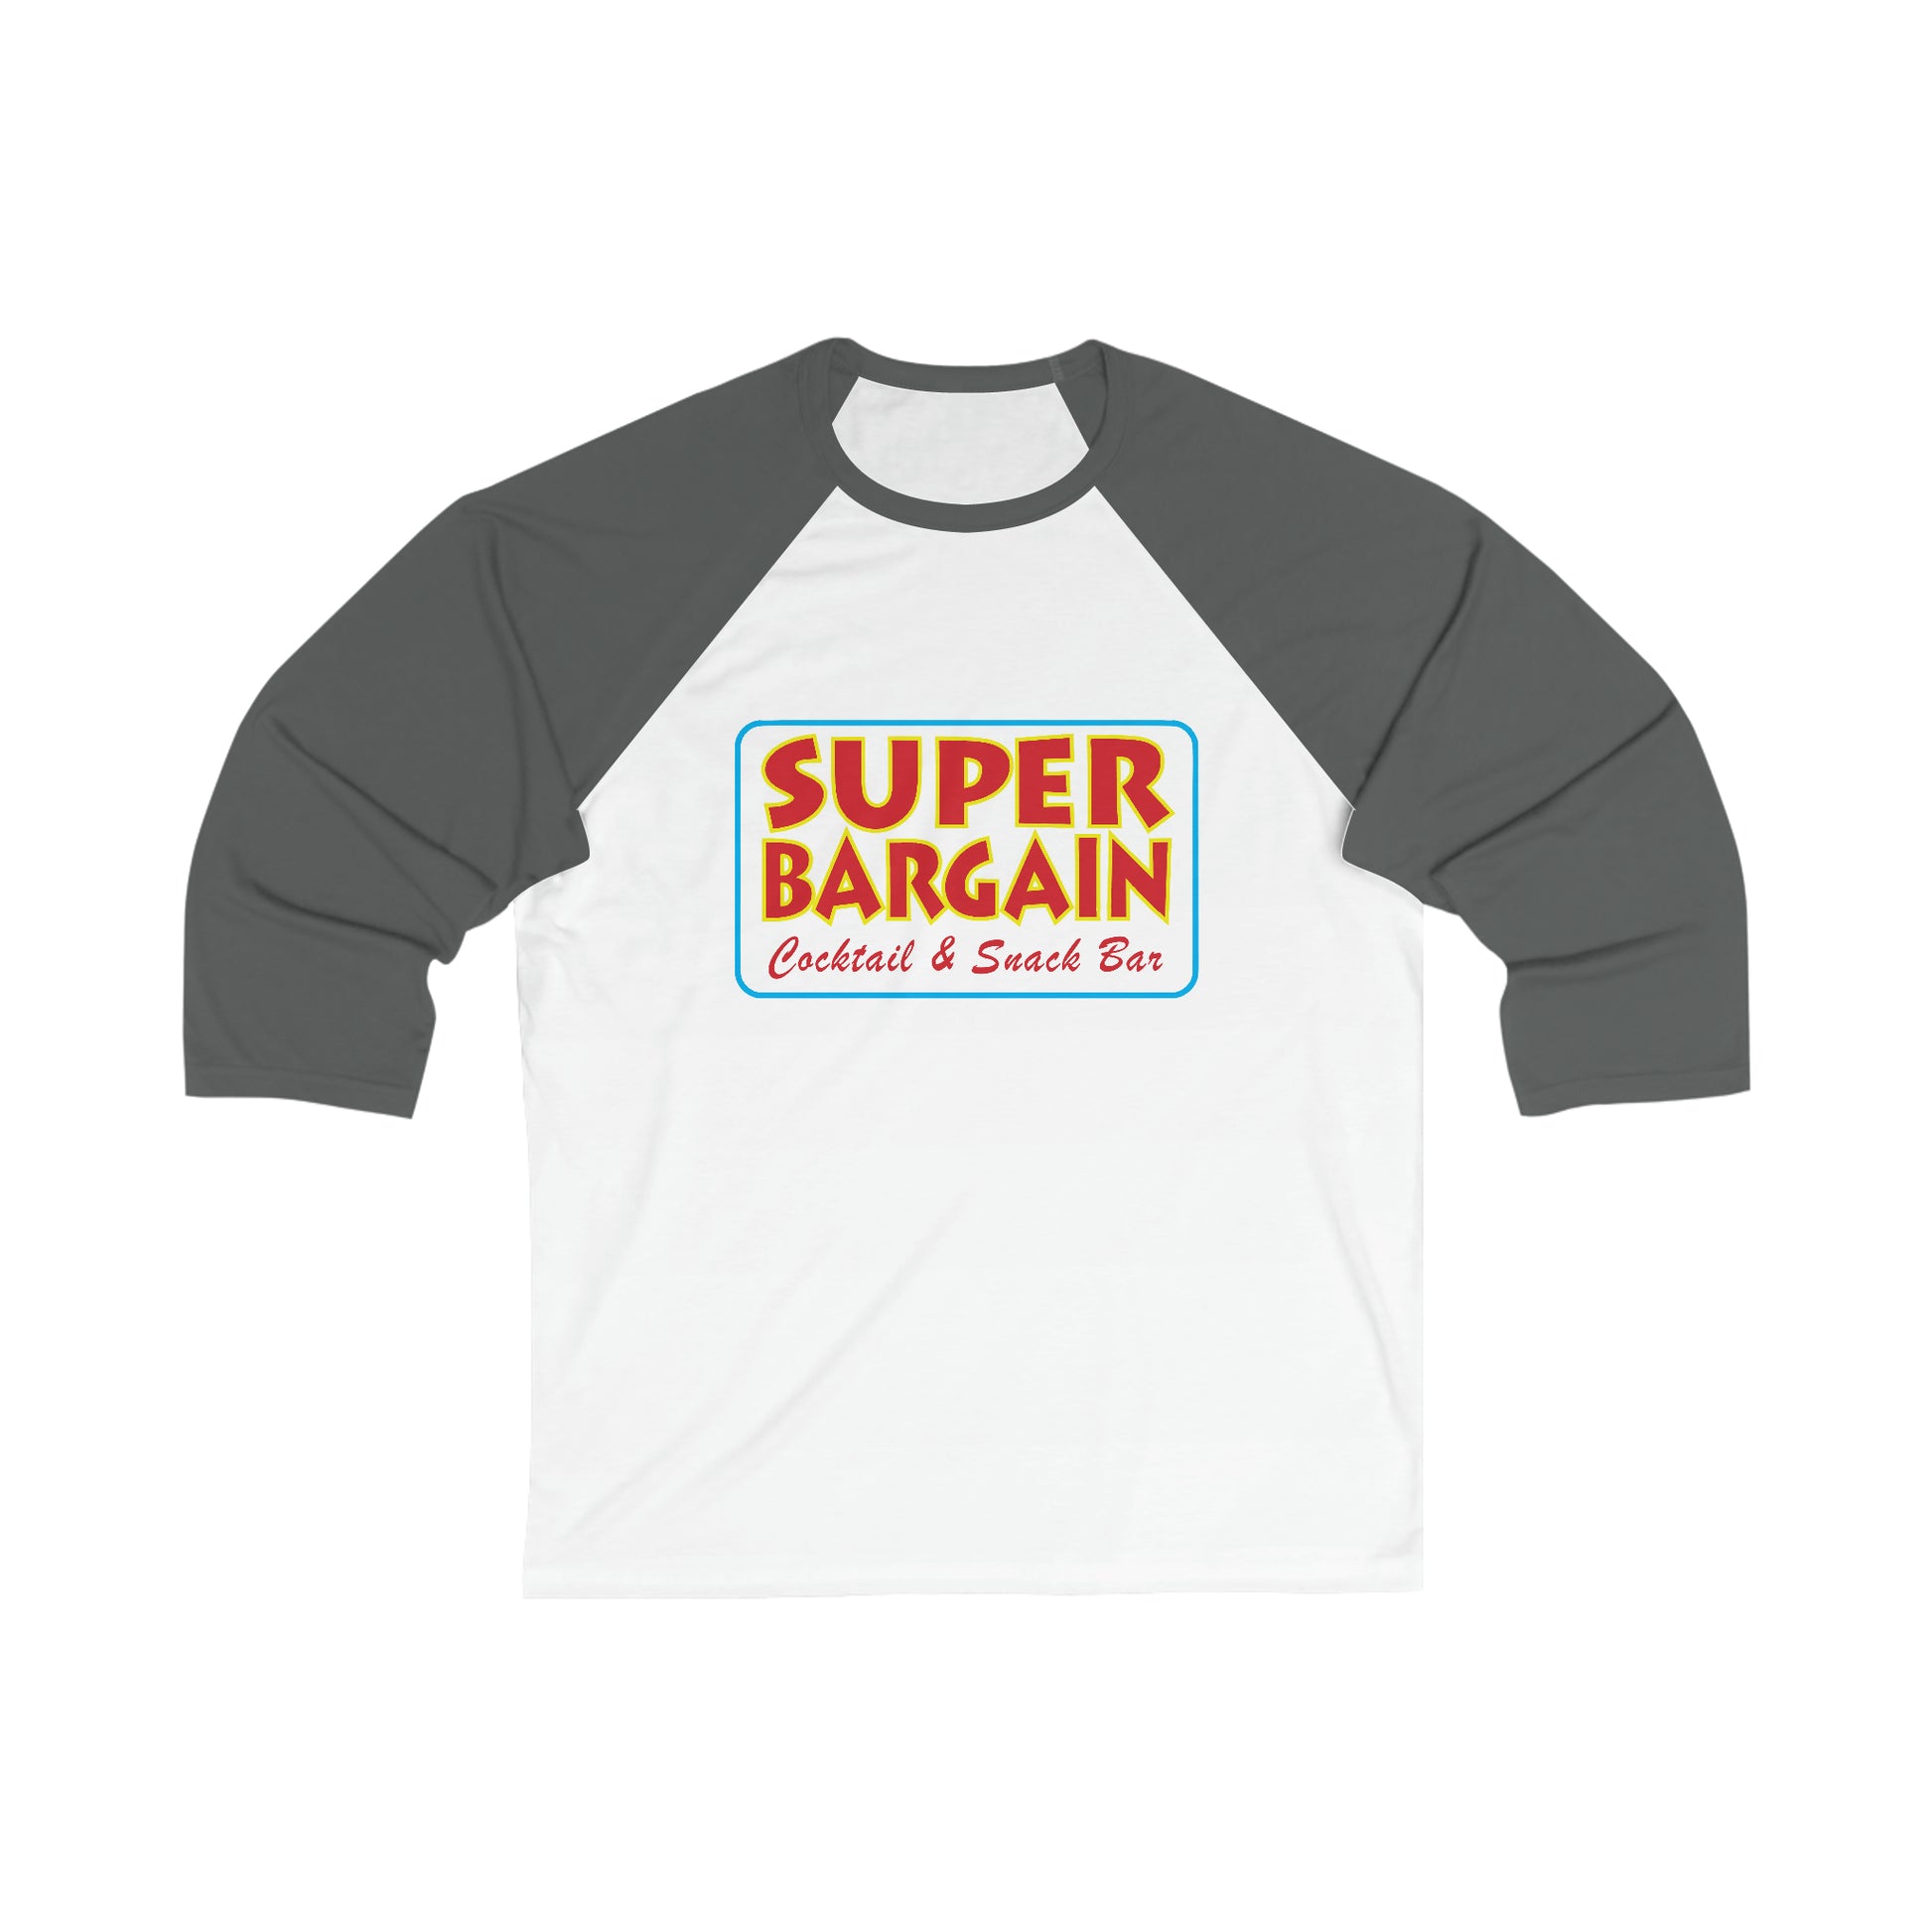 A Unisex 3\4 Sleeve Logo Baseball Tee from Printify with gray sleeves and a white body, featuring a colorful logo that reads "SUPER BARGAIN, Cocktail & Snack Bar" in Cabbagetown, Toronto in a retro font style.